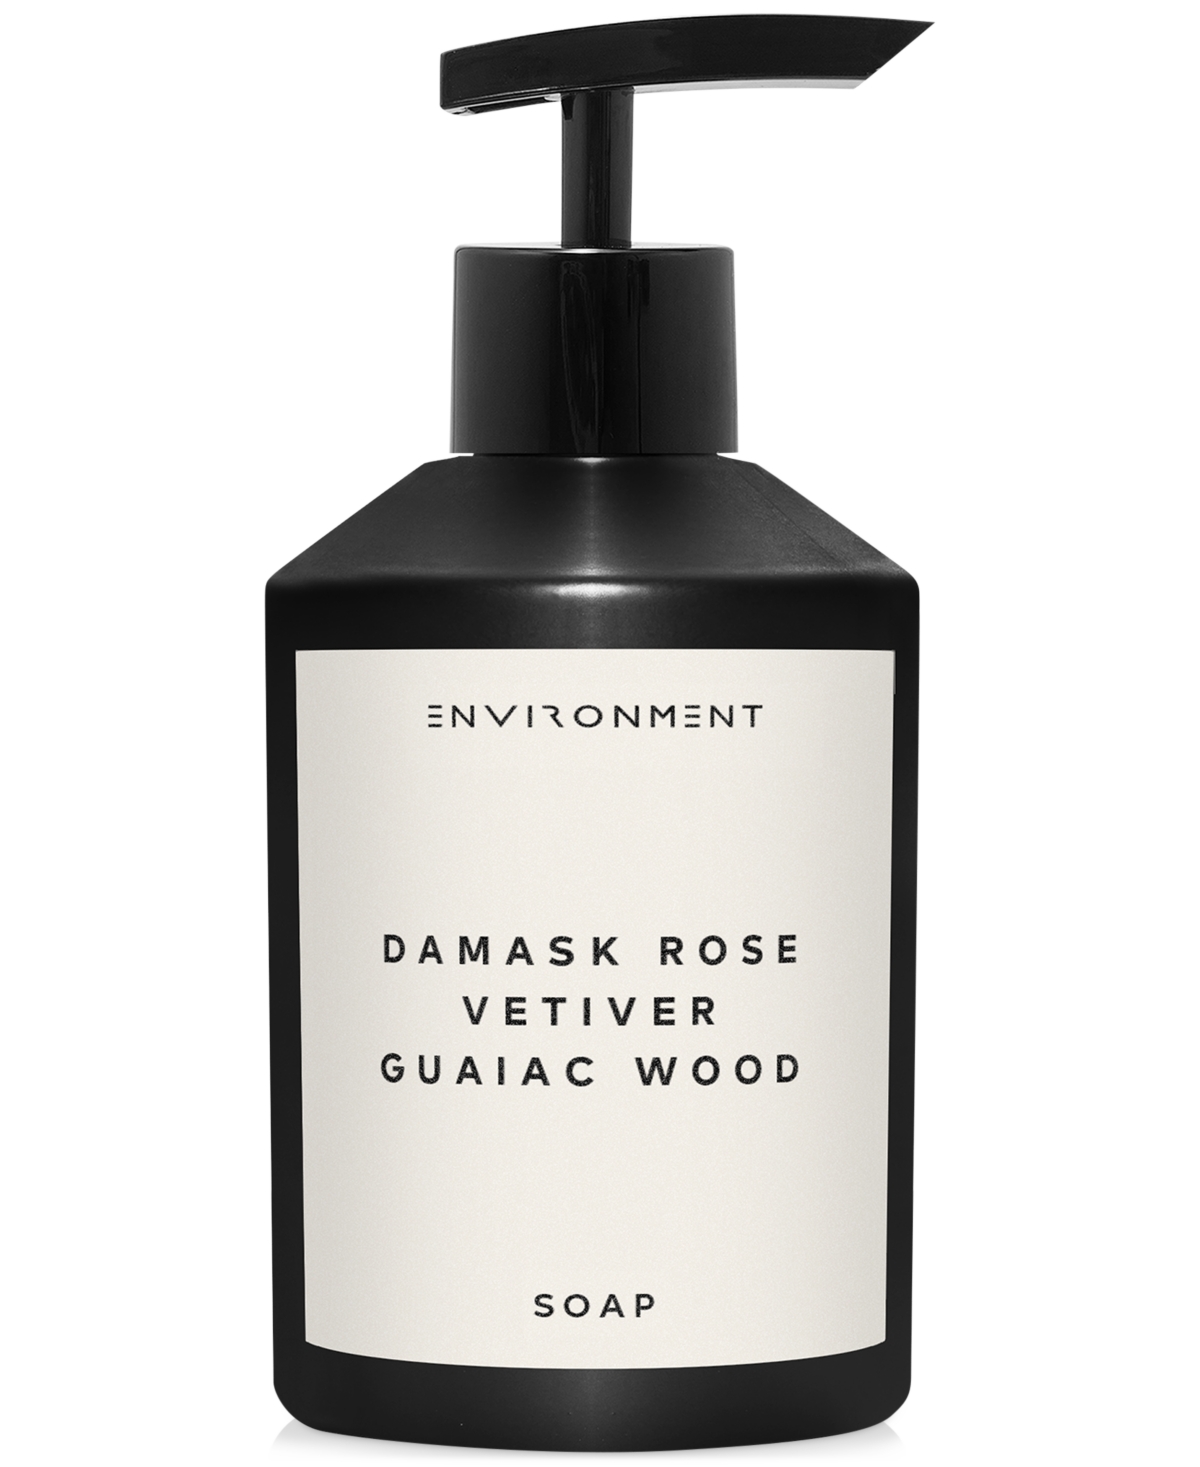 Damask Rose, Vetiver & Guaiac Wood Hand Soap (Inspired by 5-Star Luxury Hotels), 10 oz.